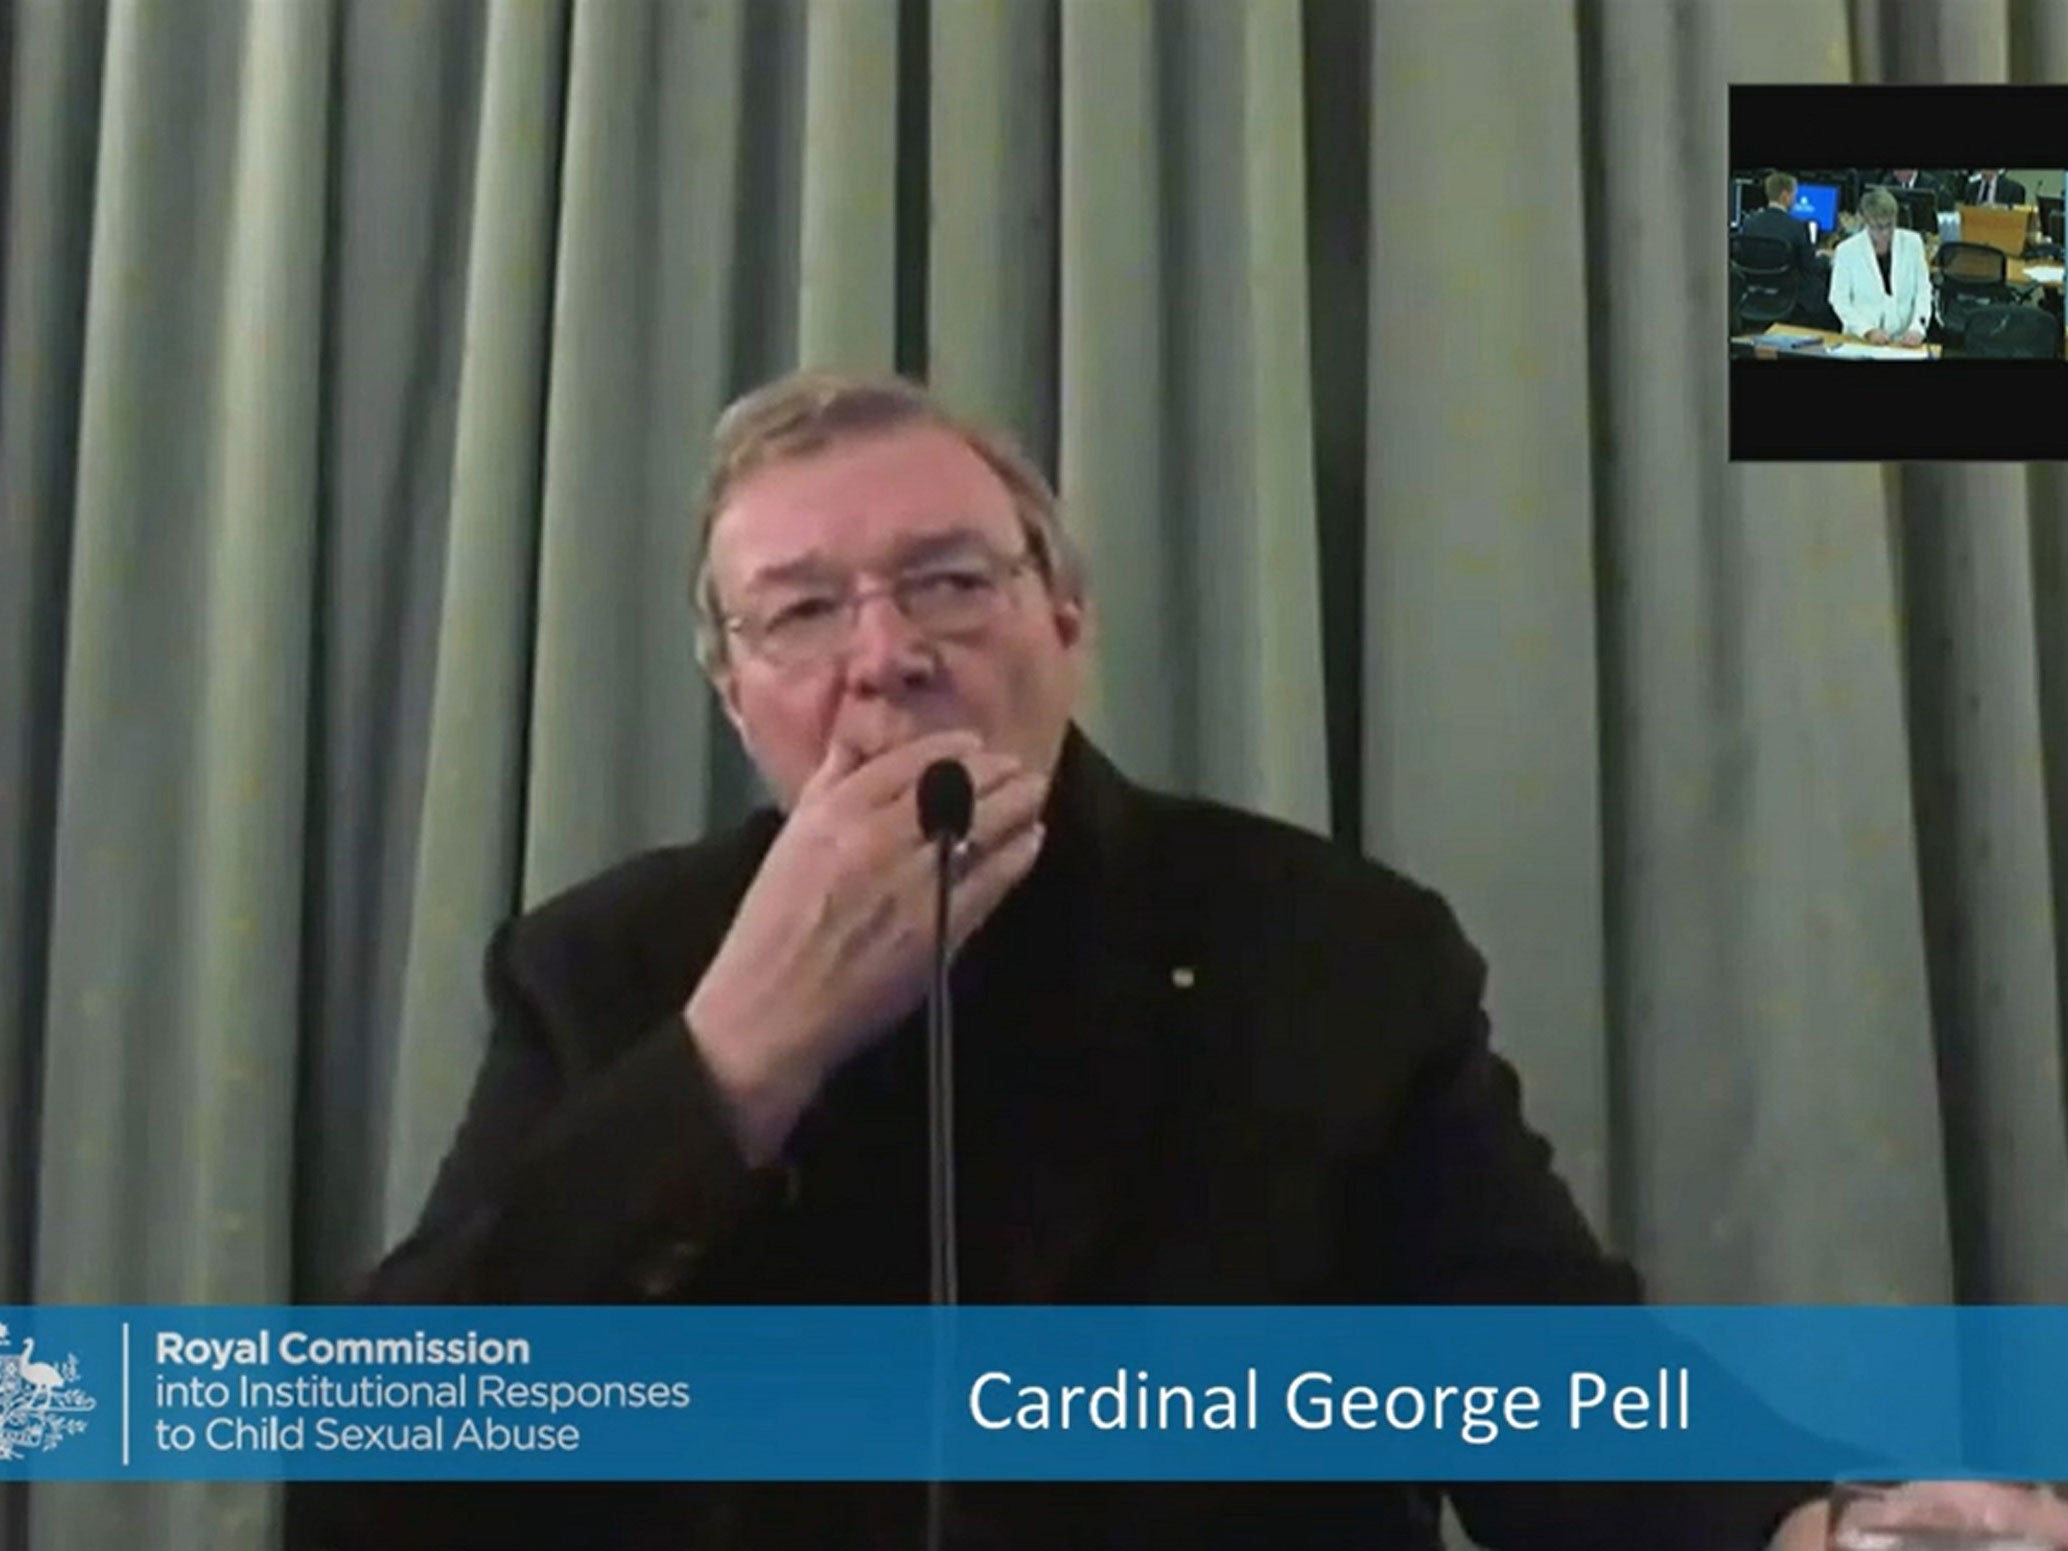 Australia's Cardinal George Pell giving evidence via video-link from a hotel in Rome to the Royal Commission in Sydney